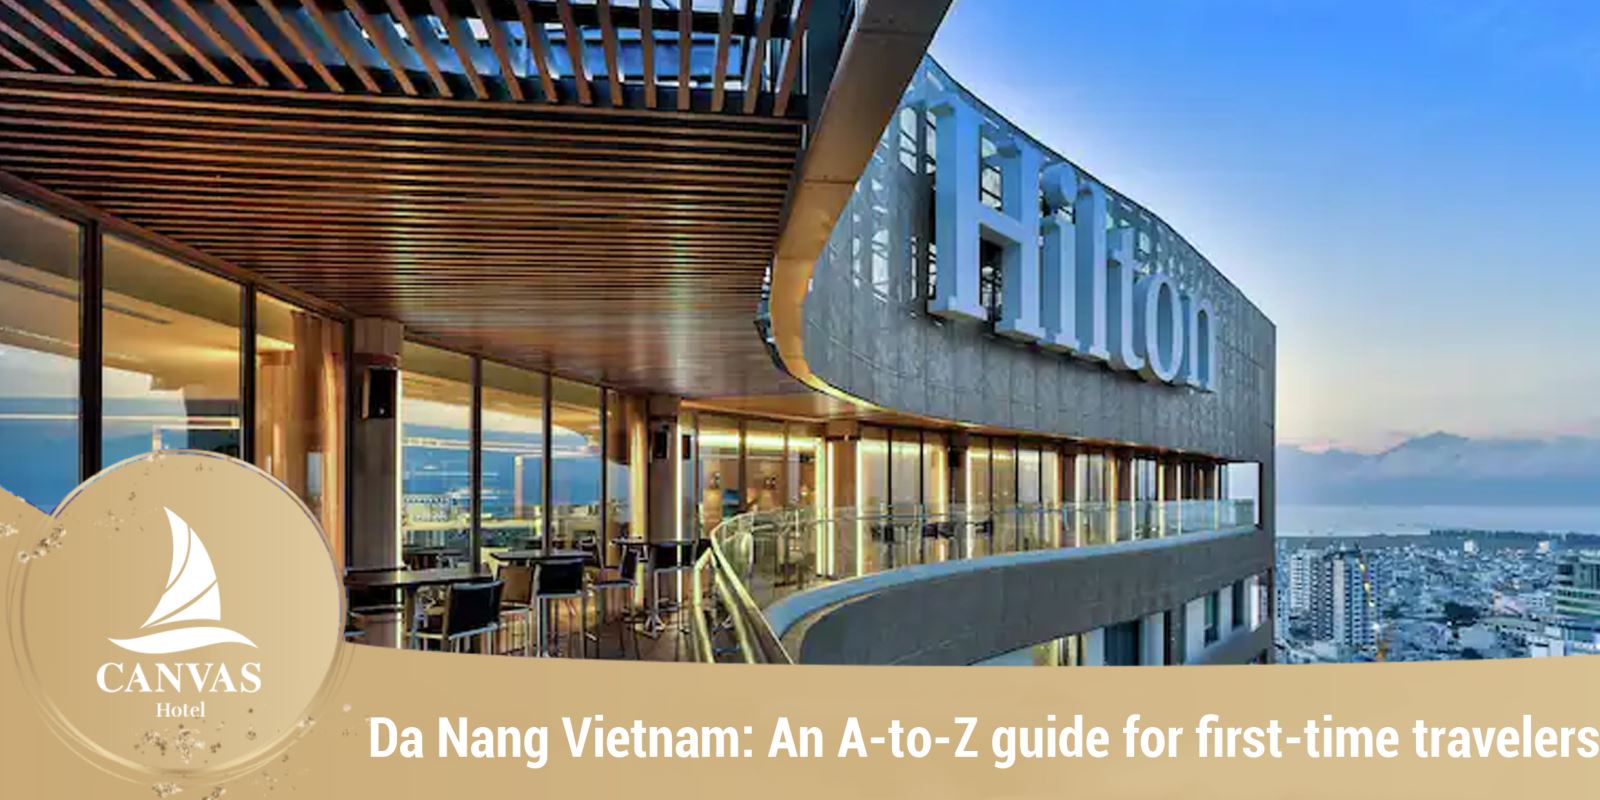 Da Nang Vietnam: An A-to-Z guide for first-time travelers